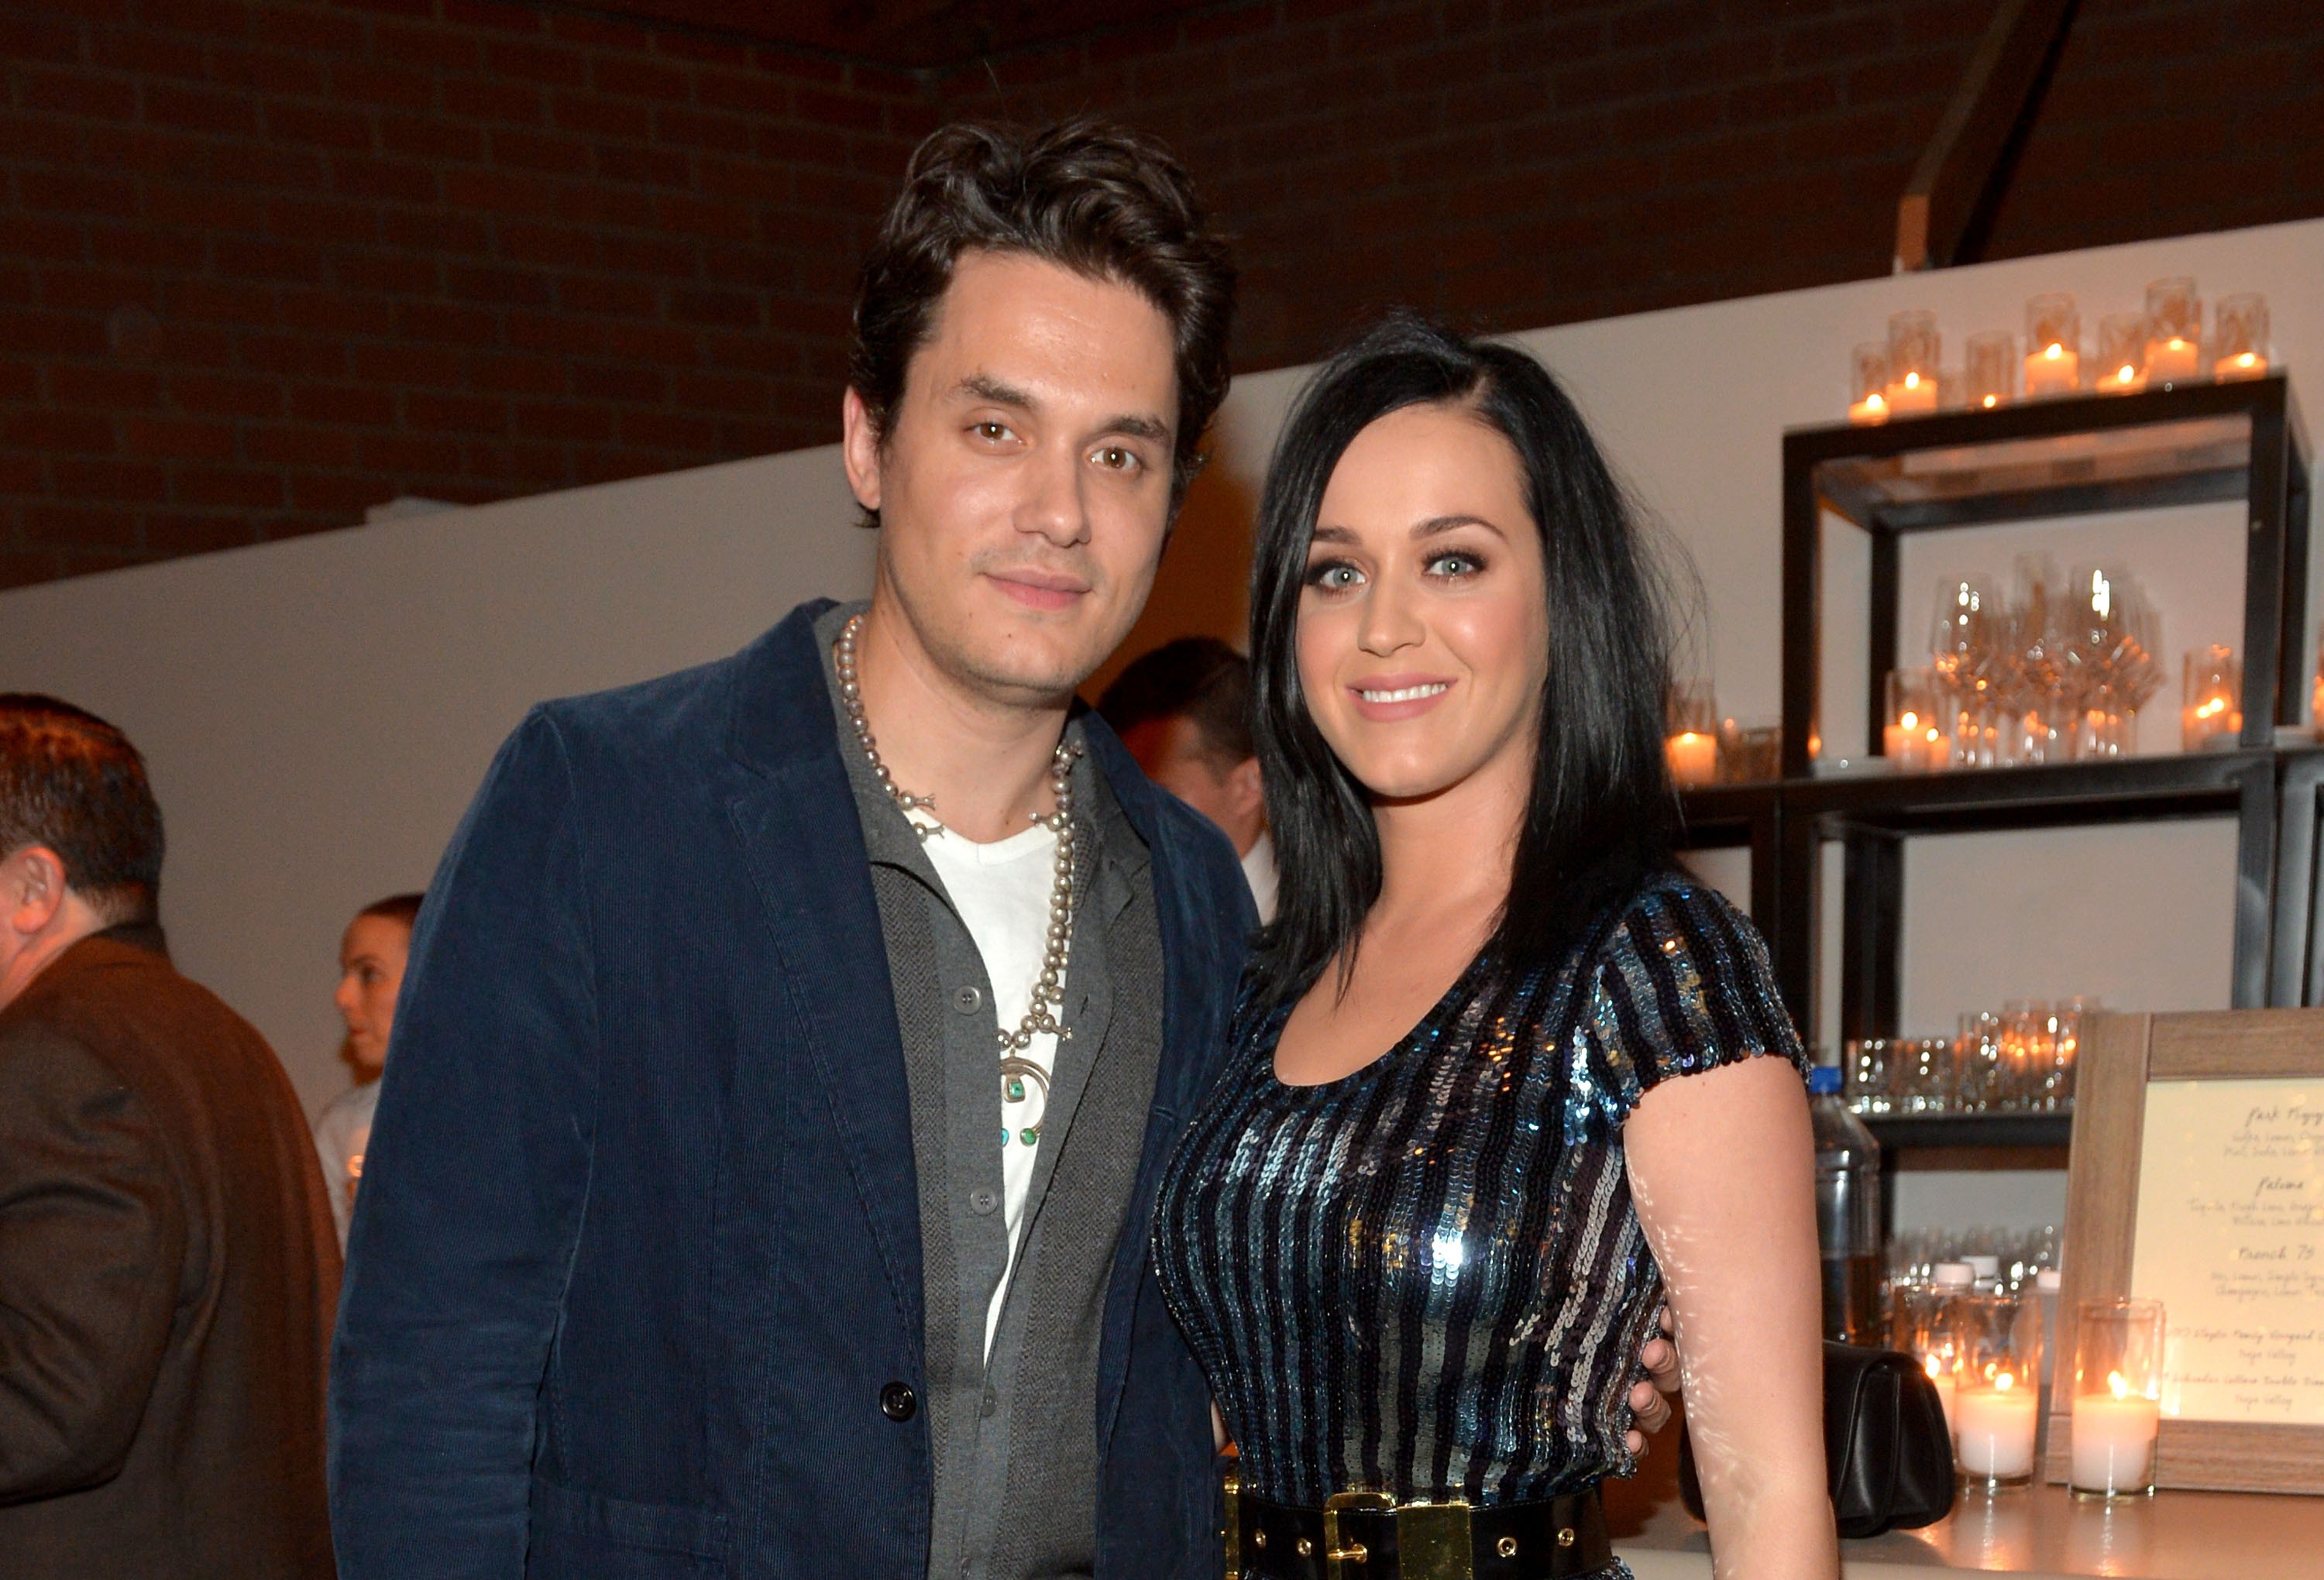 CULVER CITY, CA - JANUARY 28:  Musician John Mayer and singer Katy Perry attend Hollywood Stands Up To Cancer Event with contributors American Cancer Society and Bristol Myers Squibb hosted by Jim Toth and Reese Witherspoon and the Entertainment Industry  (Foto: Getty Images for Entertainment I)